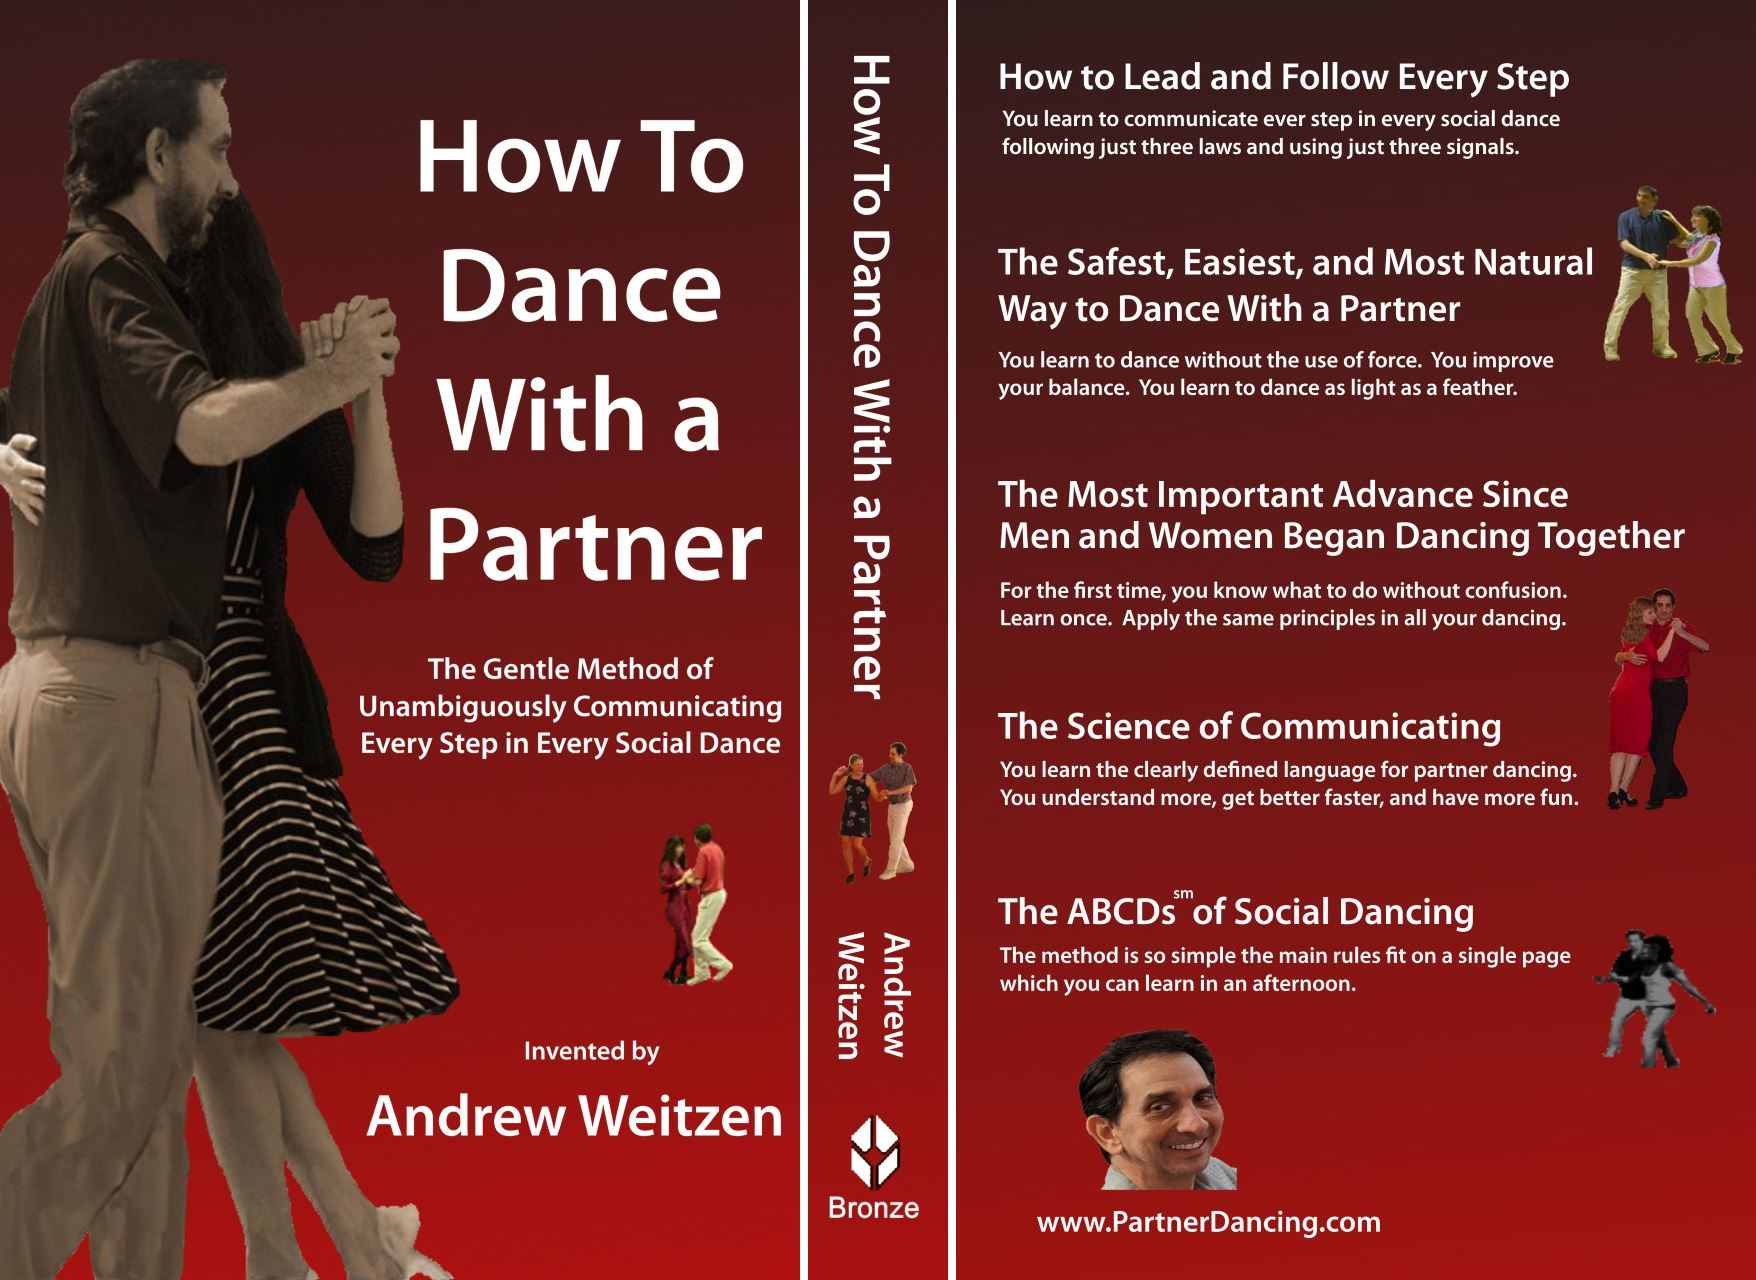 How To Dance With a Partner by Andrew Weitzen